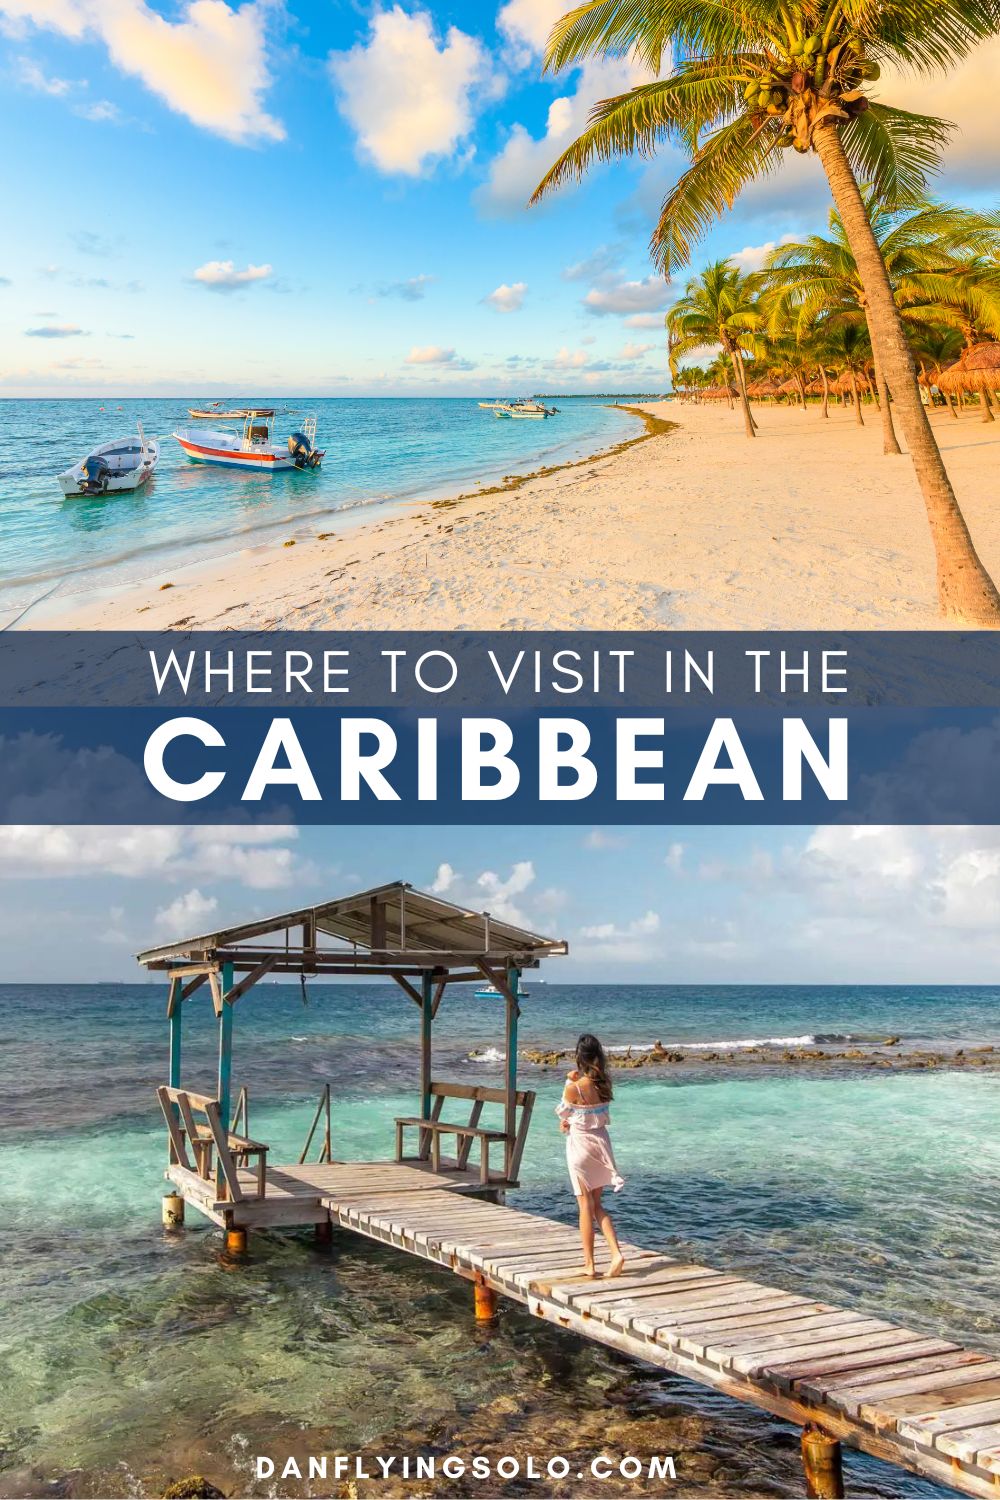 Whether you’re planning an active Caribbean vacation or a romantic honeymoon, these five Caribbean destinations will cover all bases.